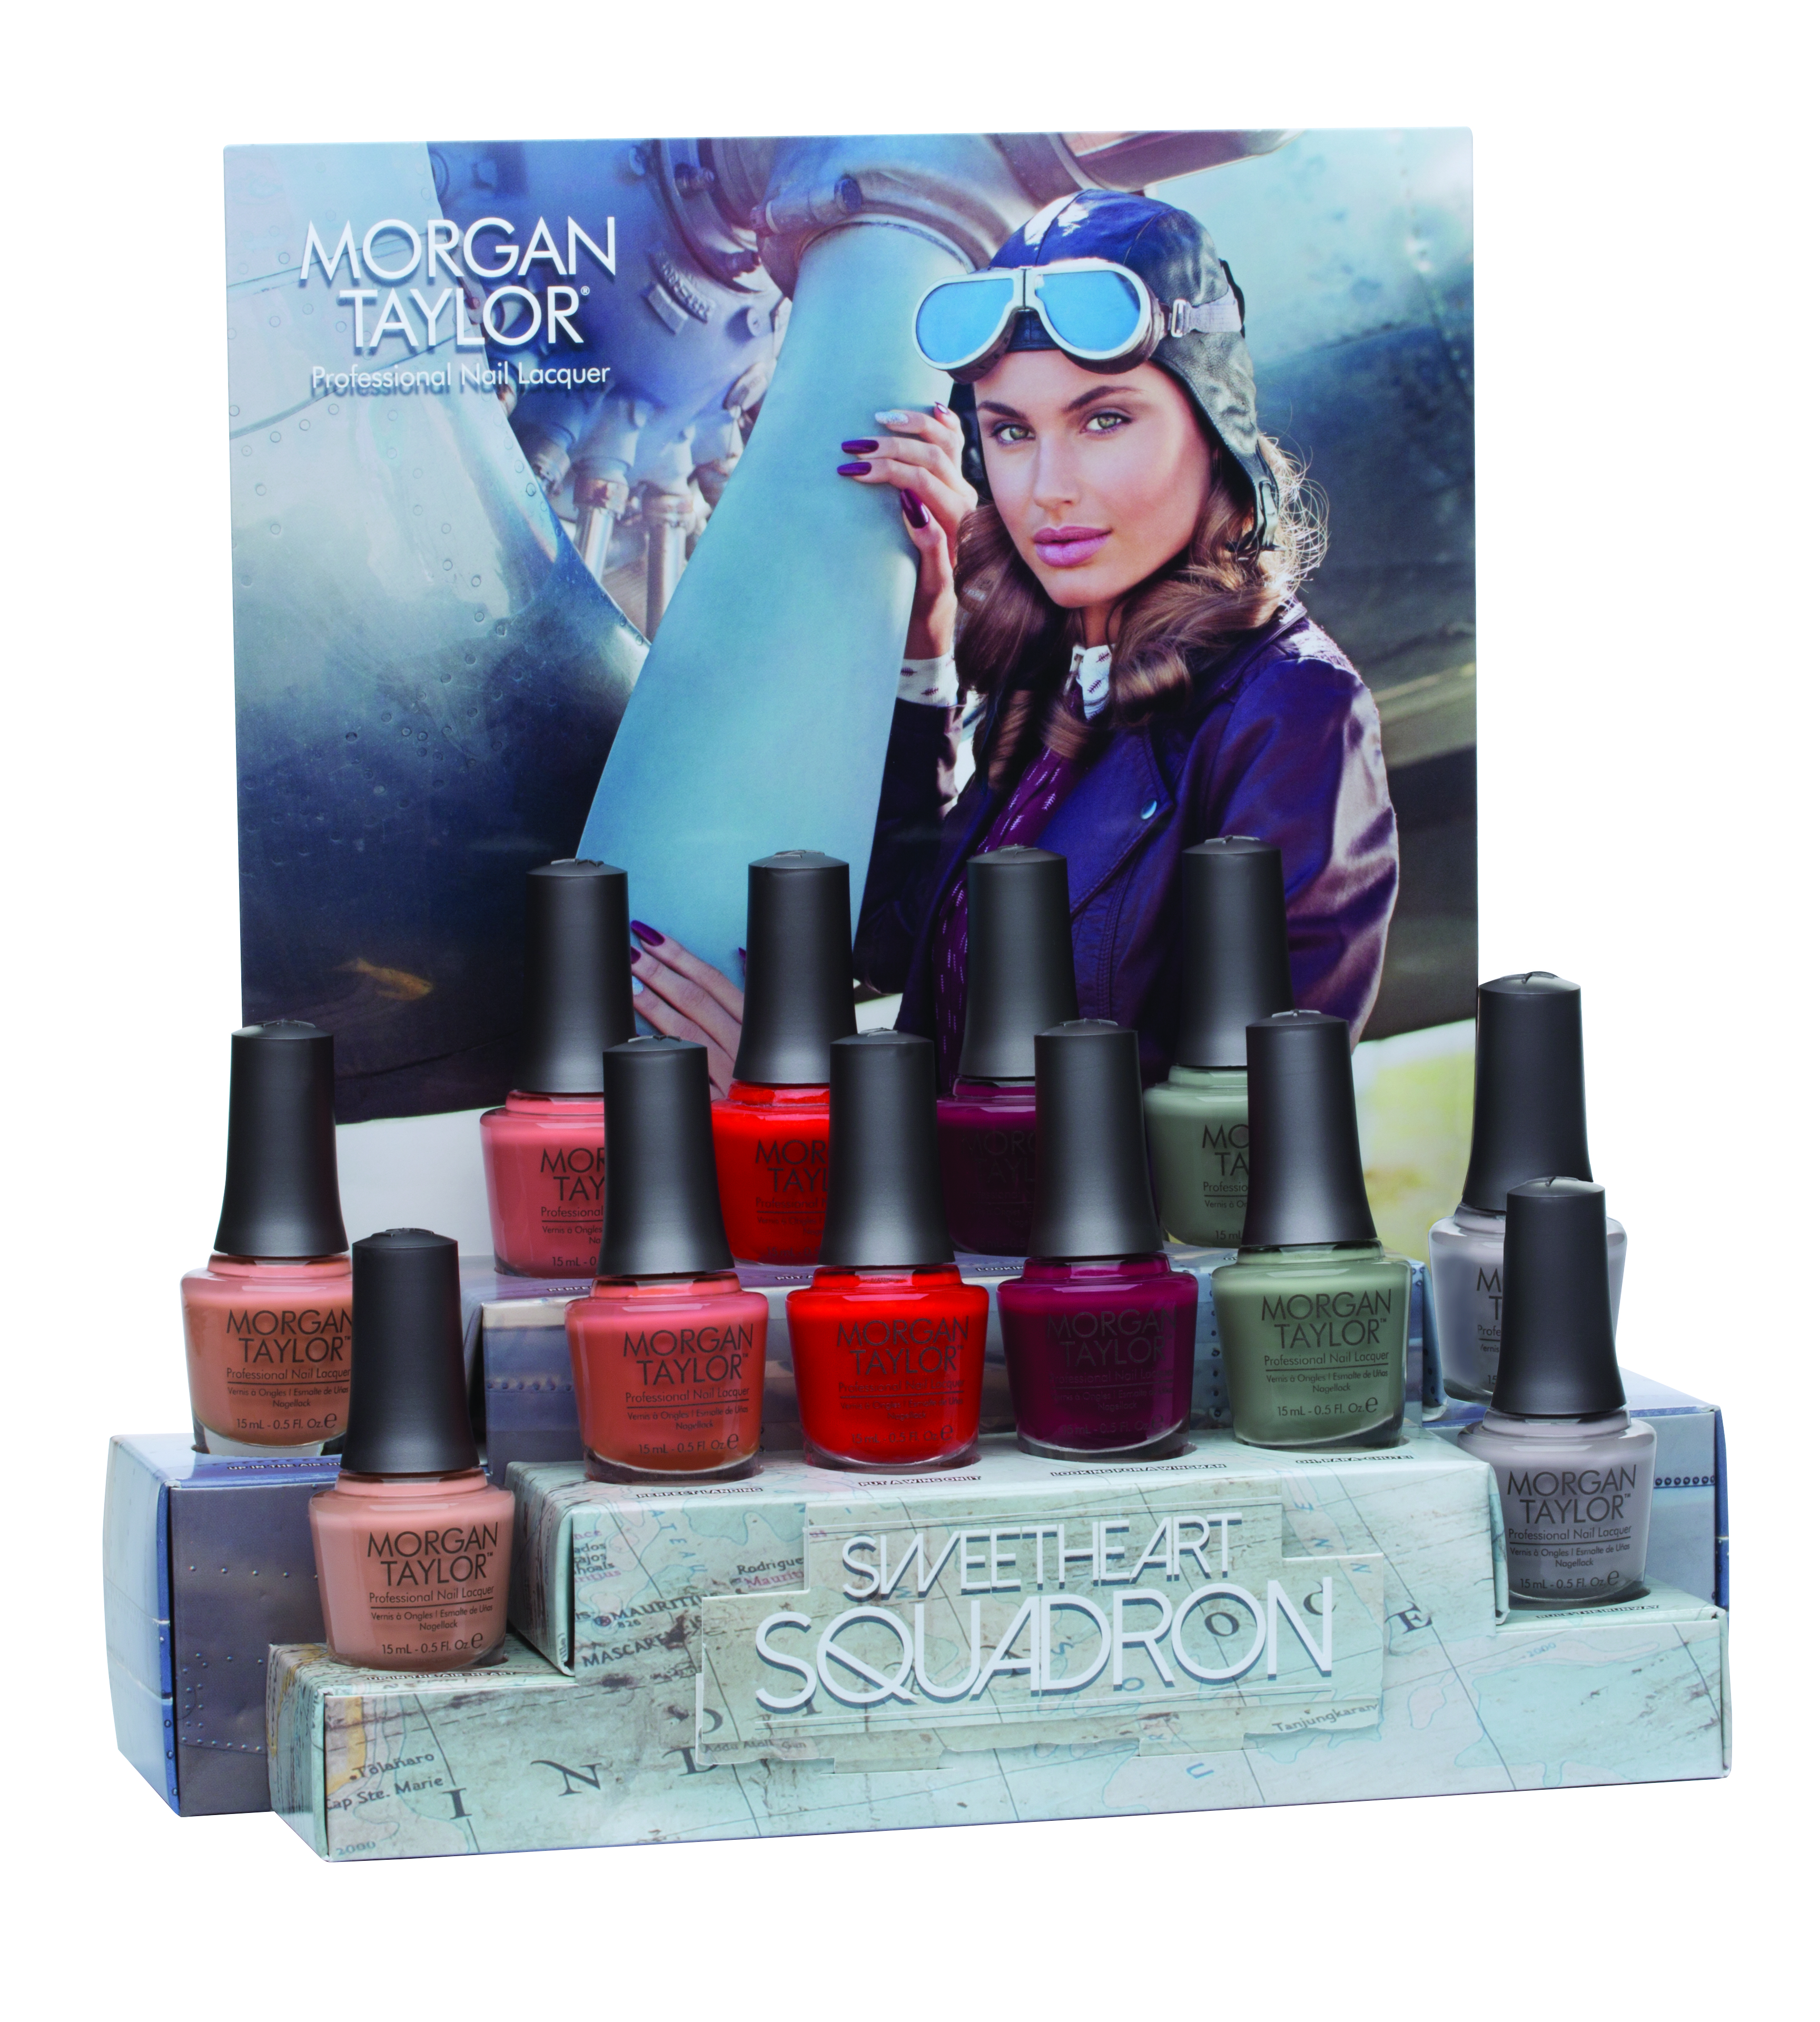 Take Flight With The New Fall Collection From Morgan Taylor!